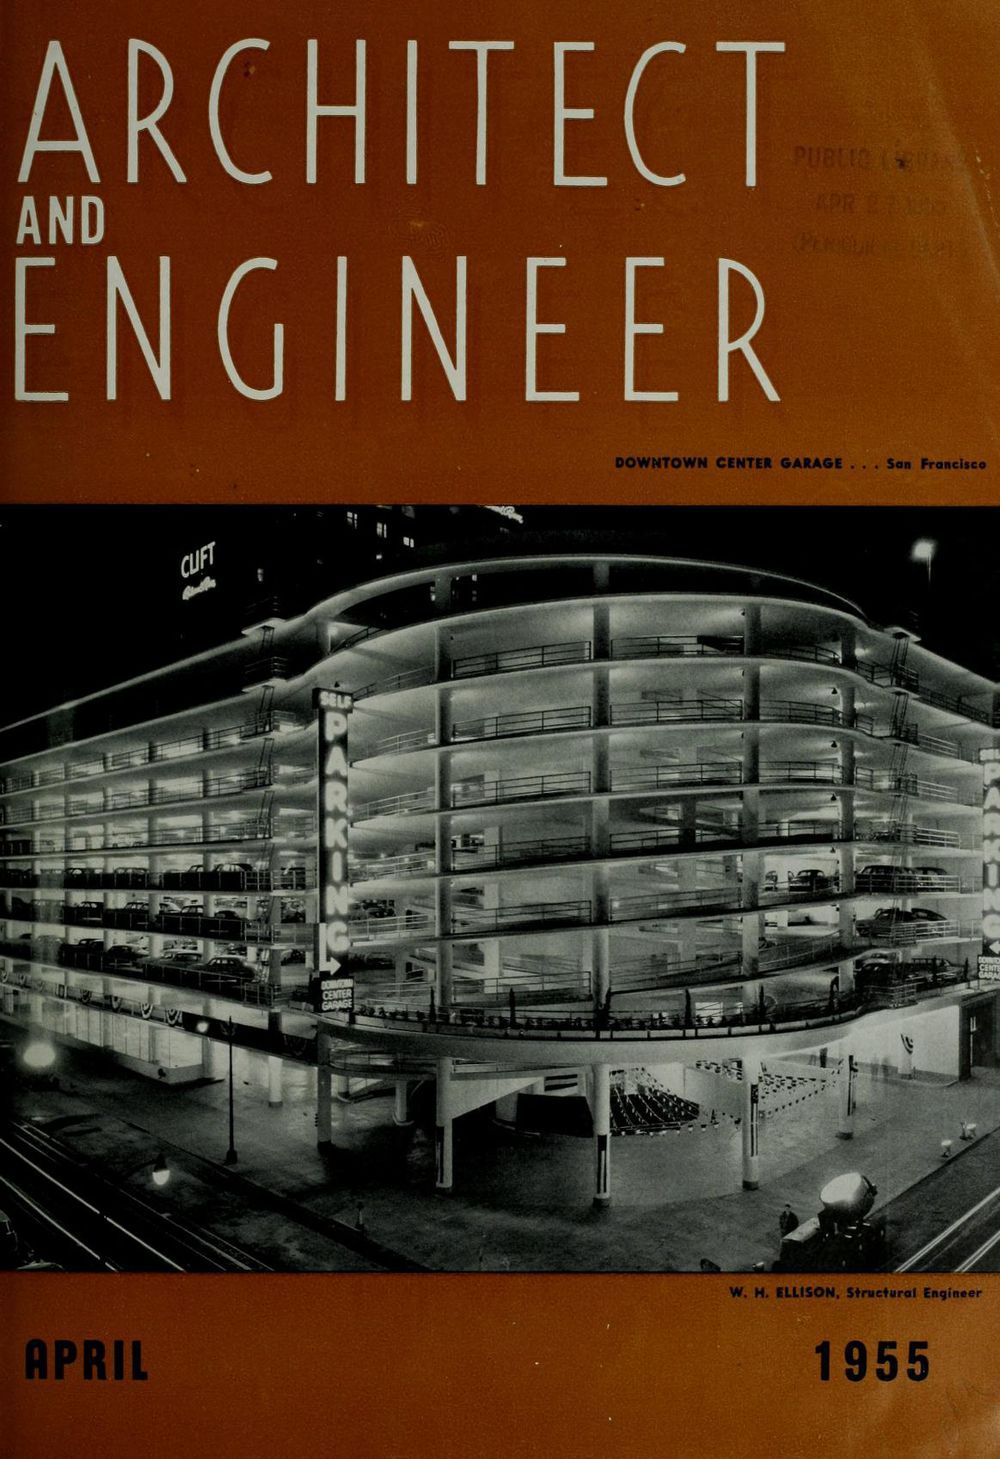 April 1955 issue of&nbsp;Architect and Engineer.&nbsp;